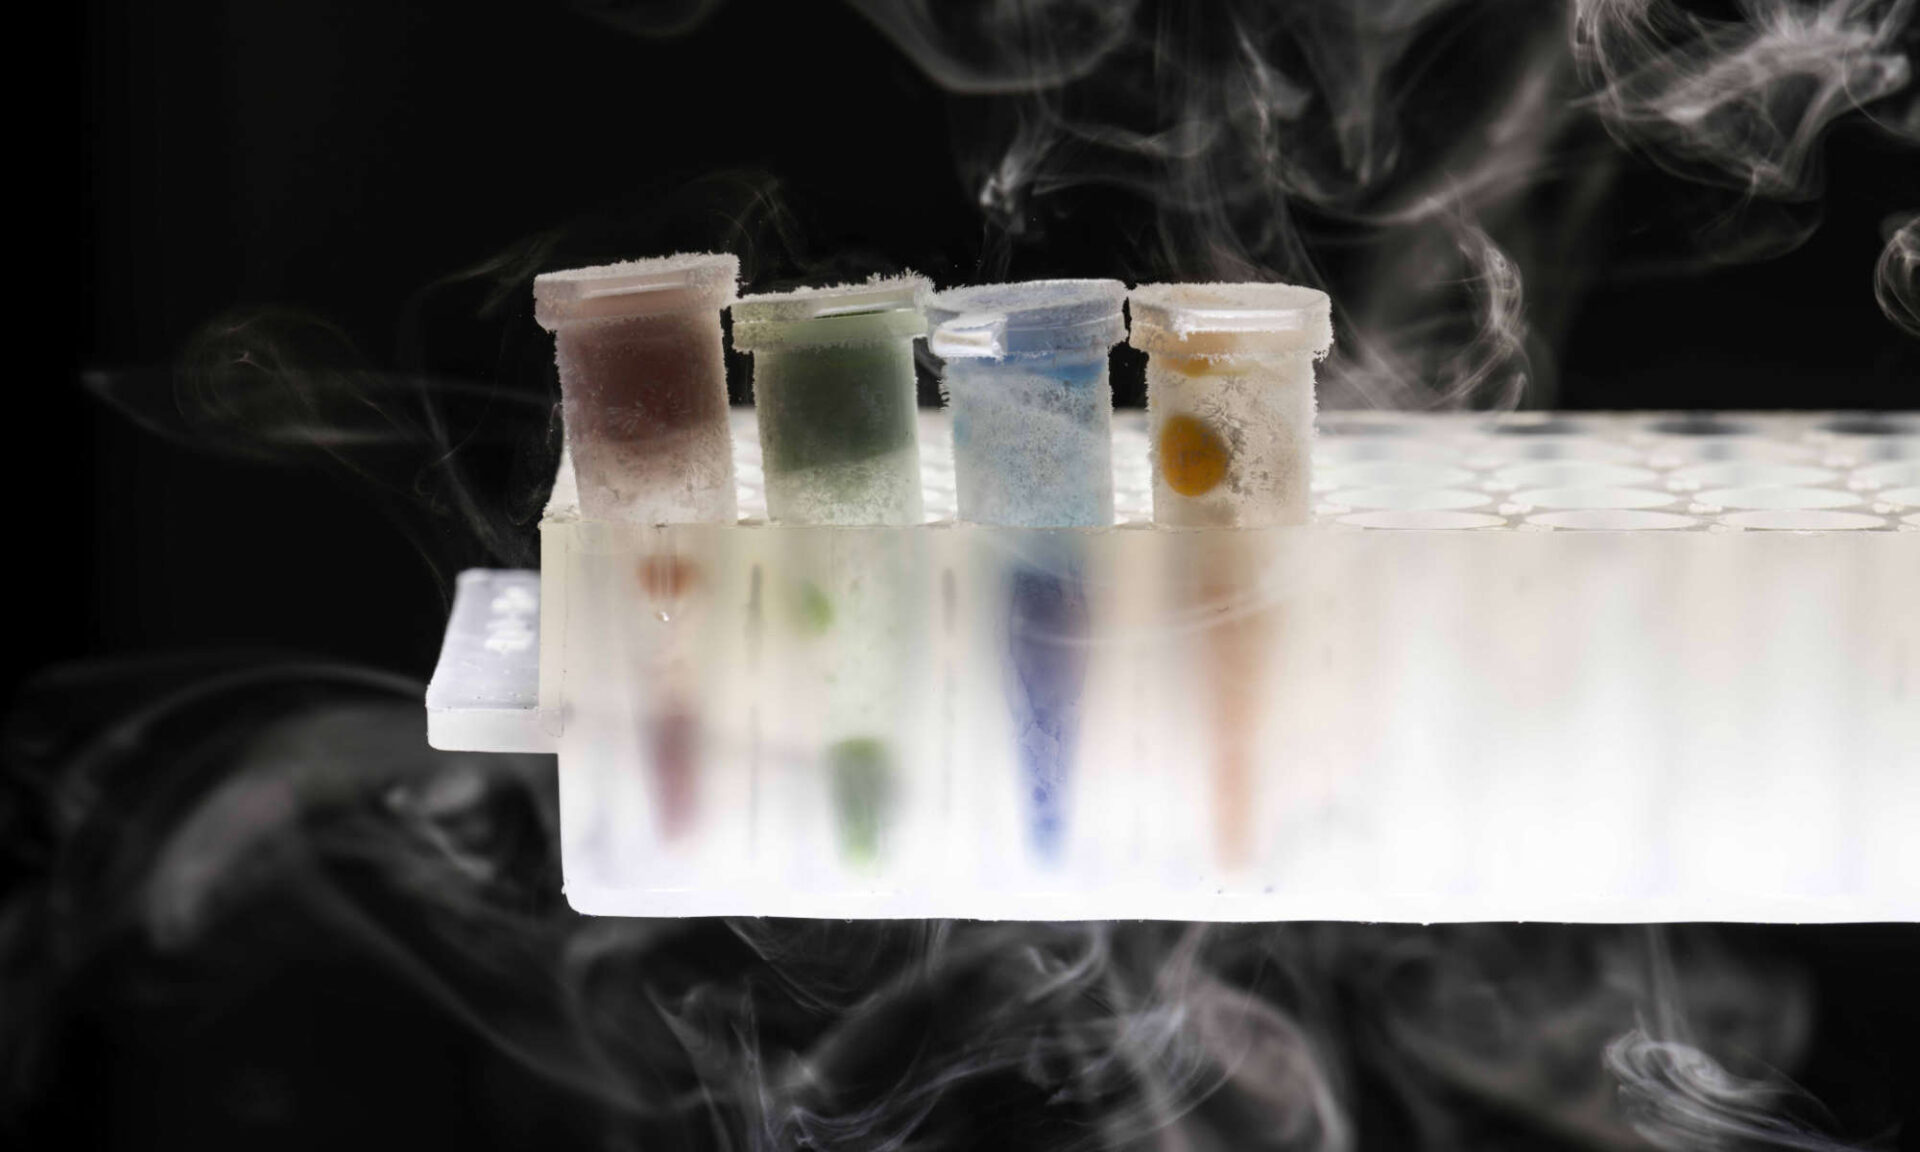 Four tubes, each a different color, containing hydrogels frozen in liquid nitrogen and obtained via 3d bioprinting.